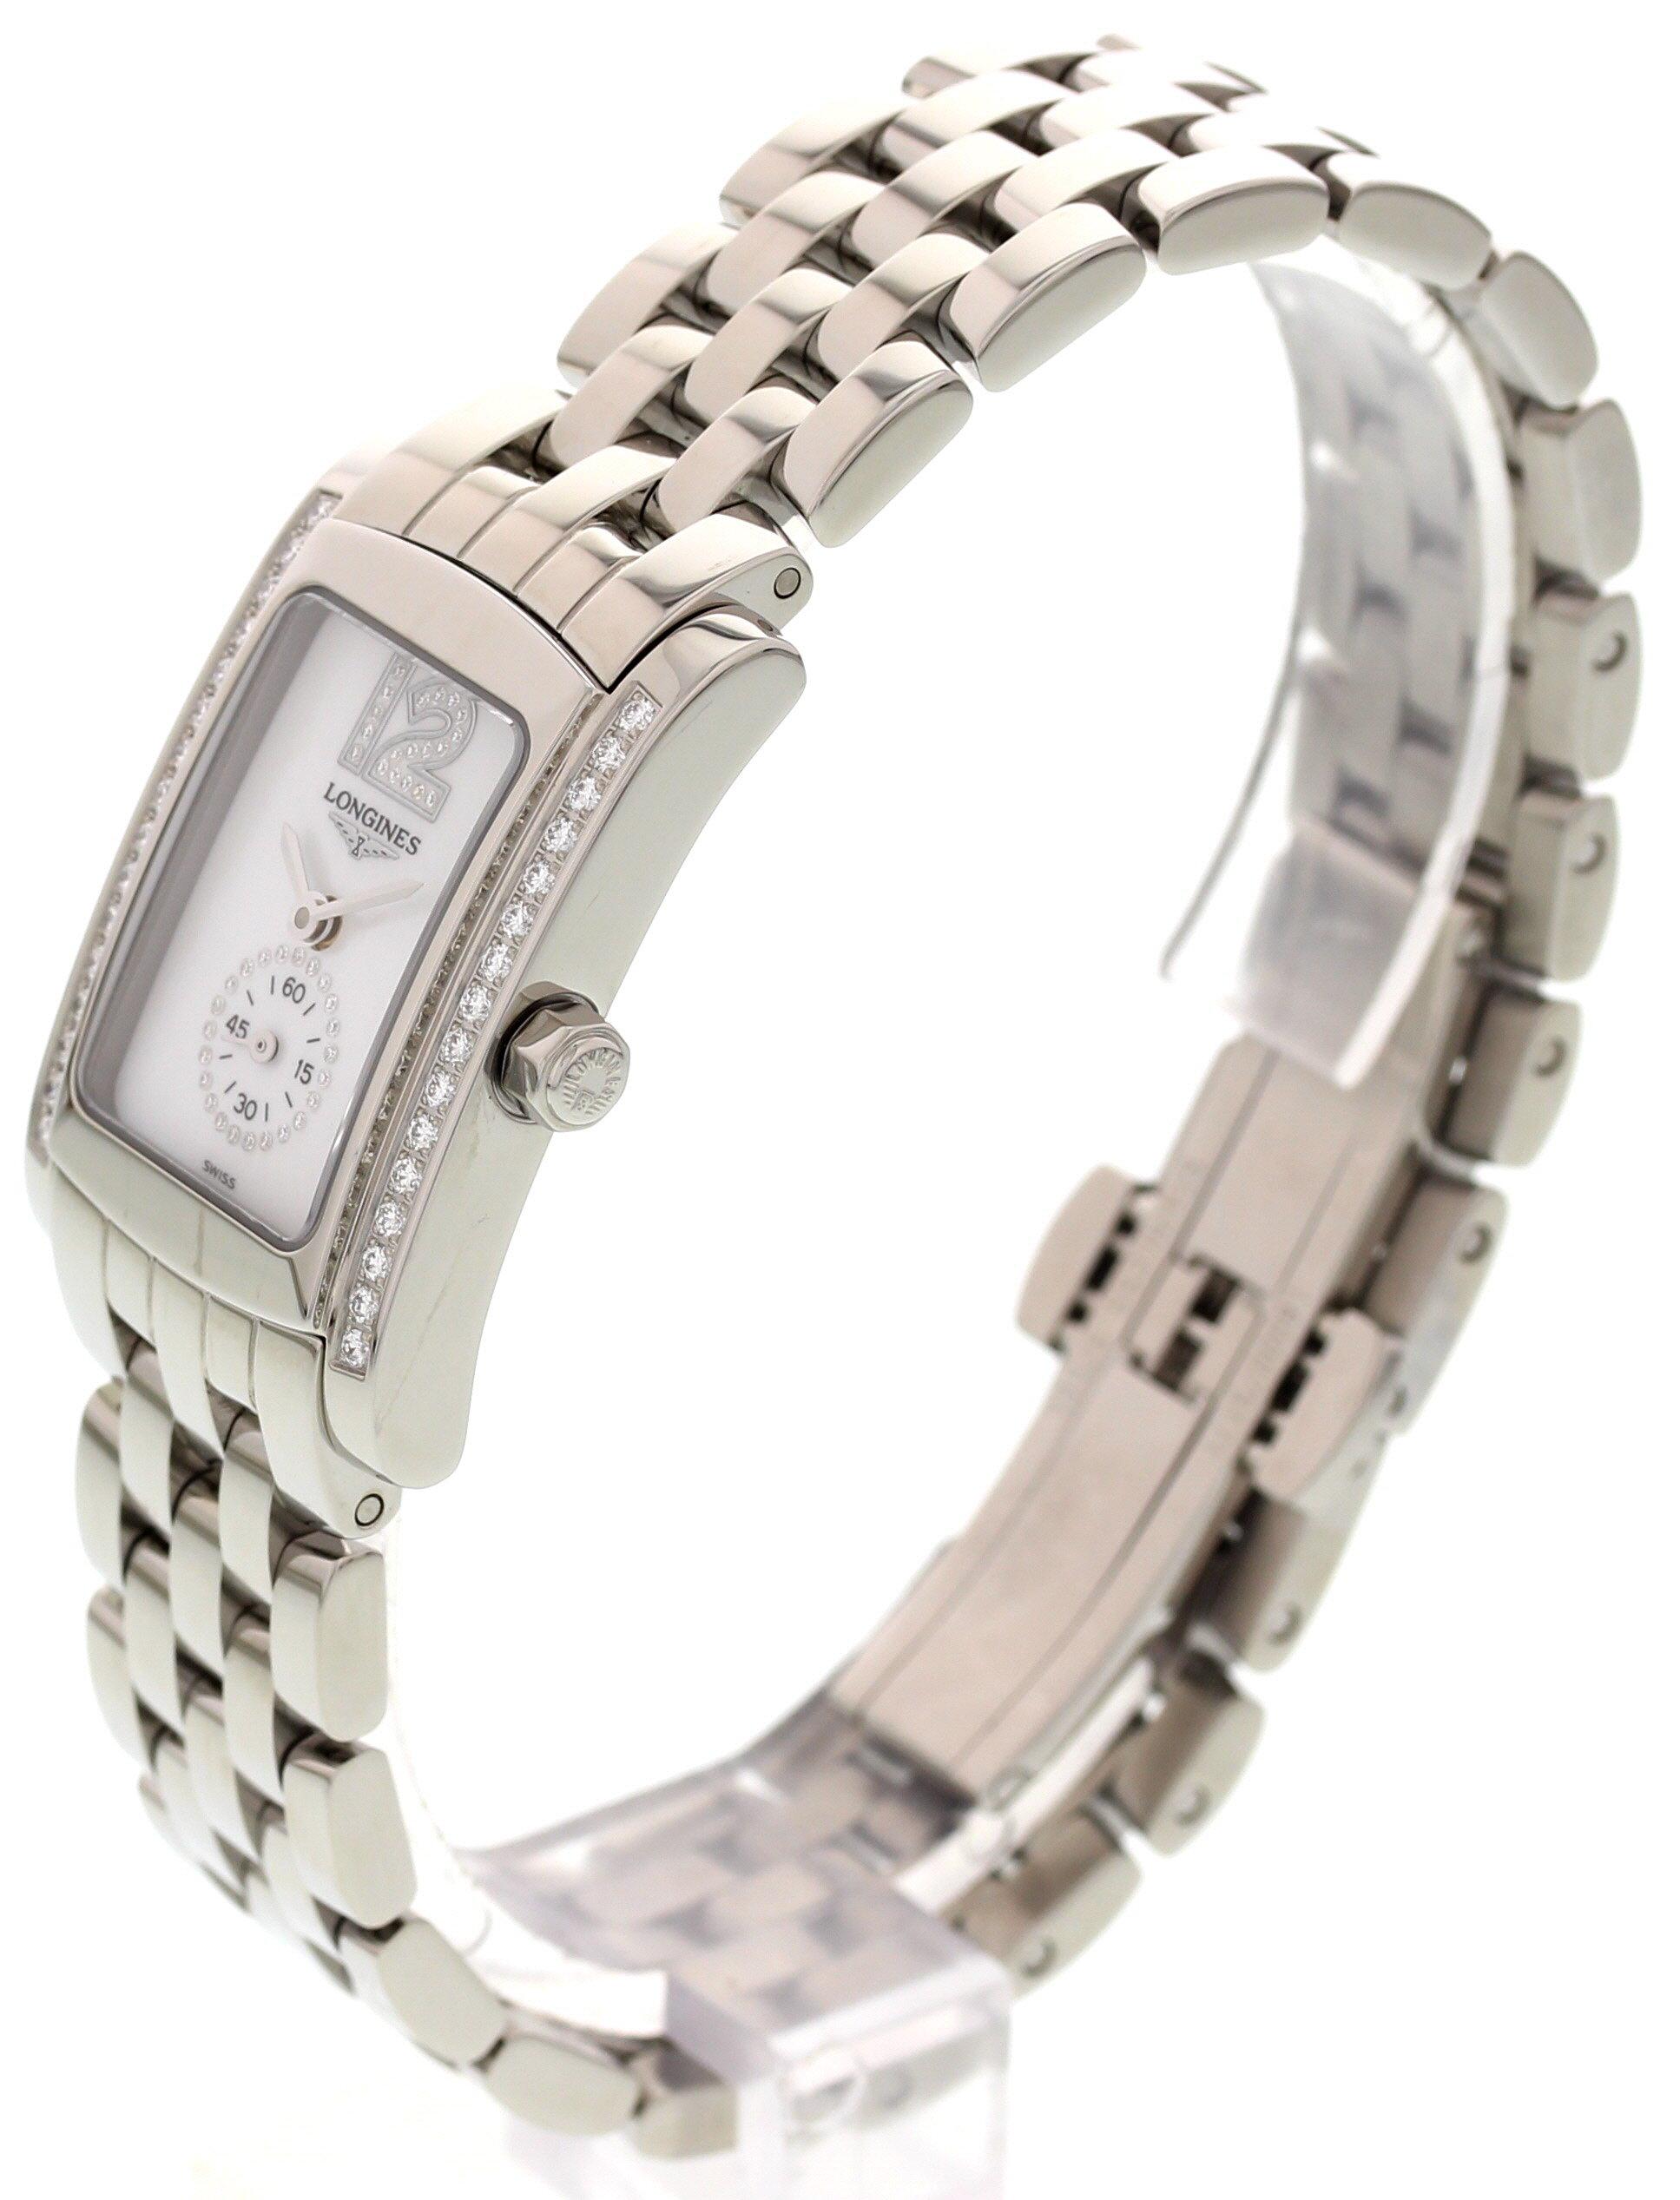 Ladies Longines DolceVita Stainless Steel with Diamonds L5.155.0 In Excellent Condition For Sale In New York, NY